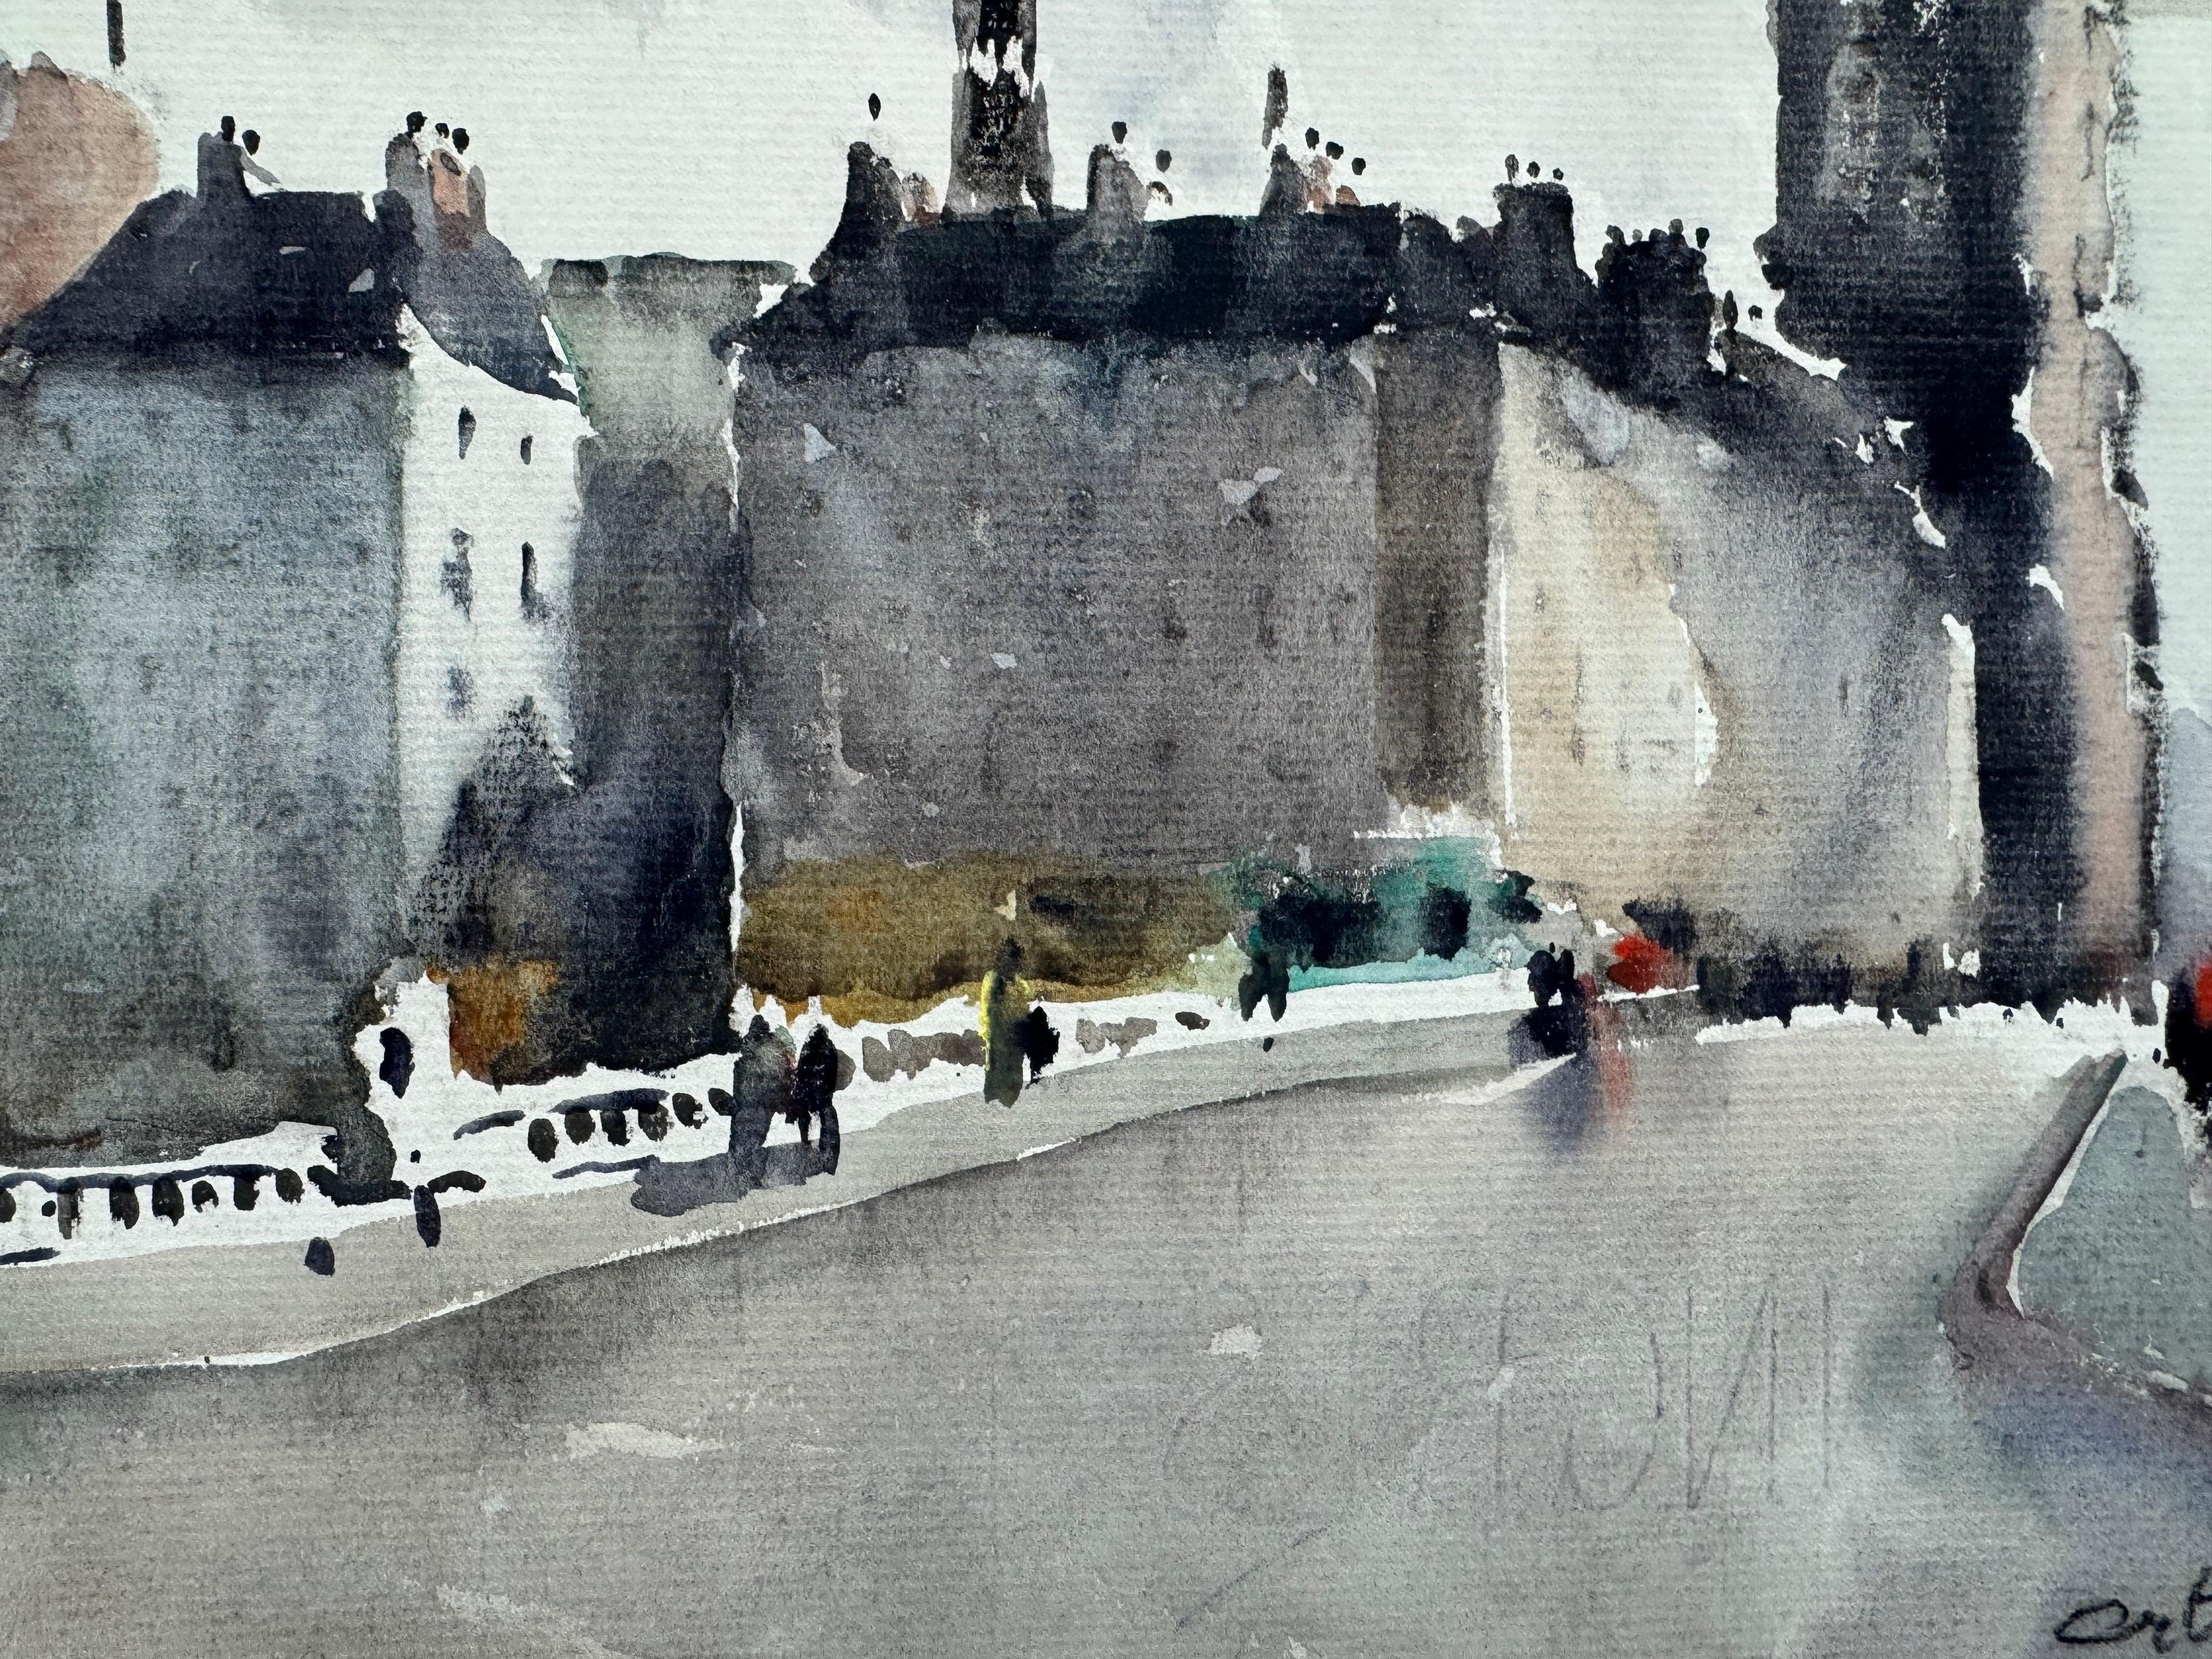 Steeple Scene, Mixed Media on Paper Colorful Paris City Scene - Impressionist Painting by Unknown